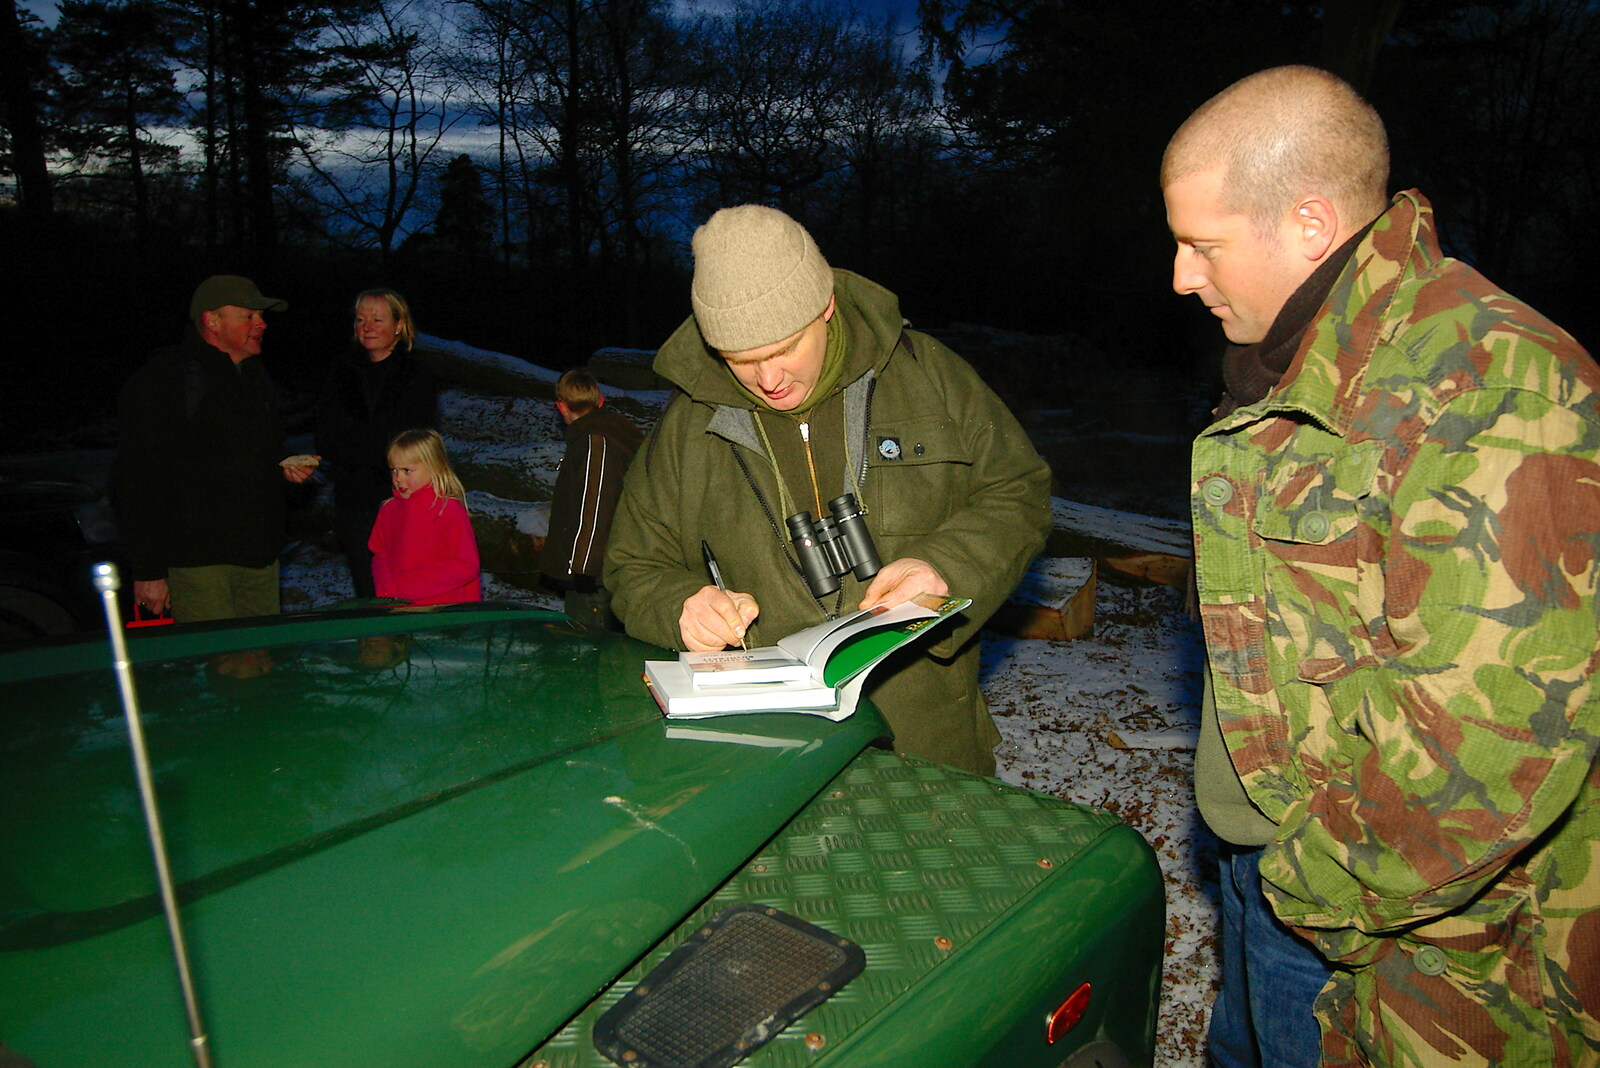 Ray does book signing on his Land Rover from Walk Like a Shadow: A Day With Ray Mears, Ashdown Forest, East Sussex - 29th December 2005